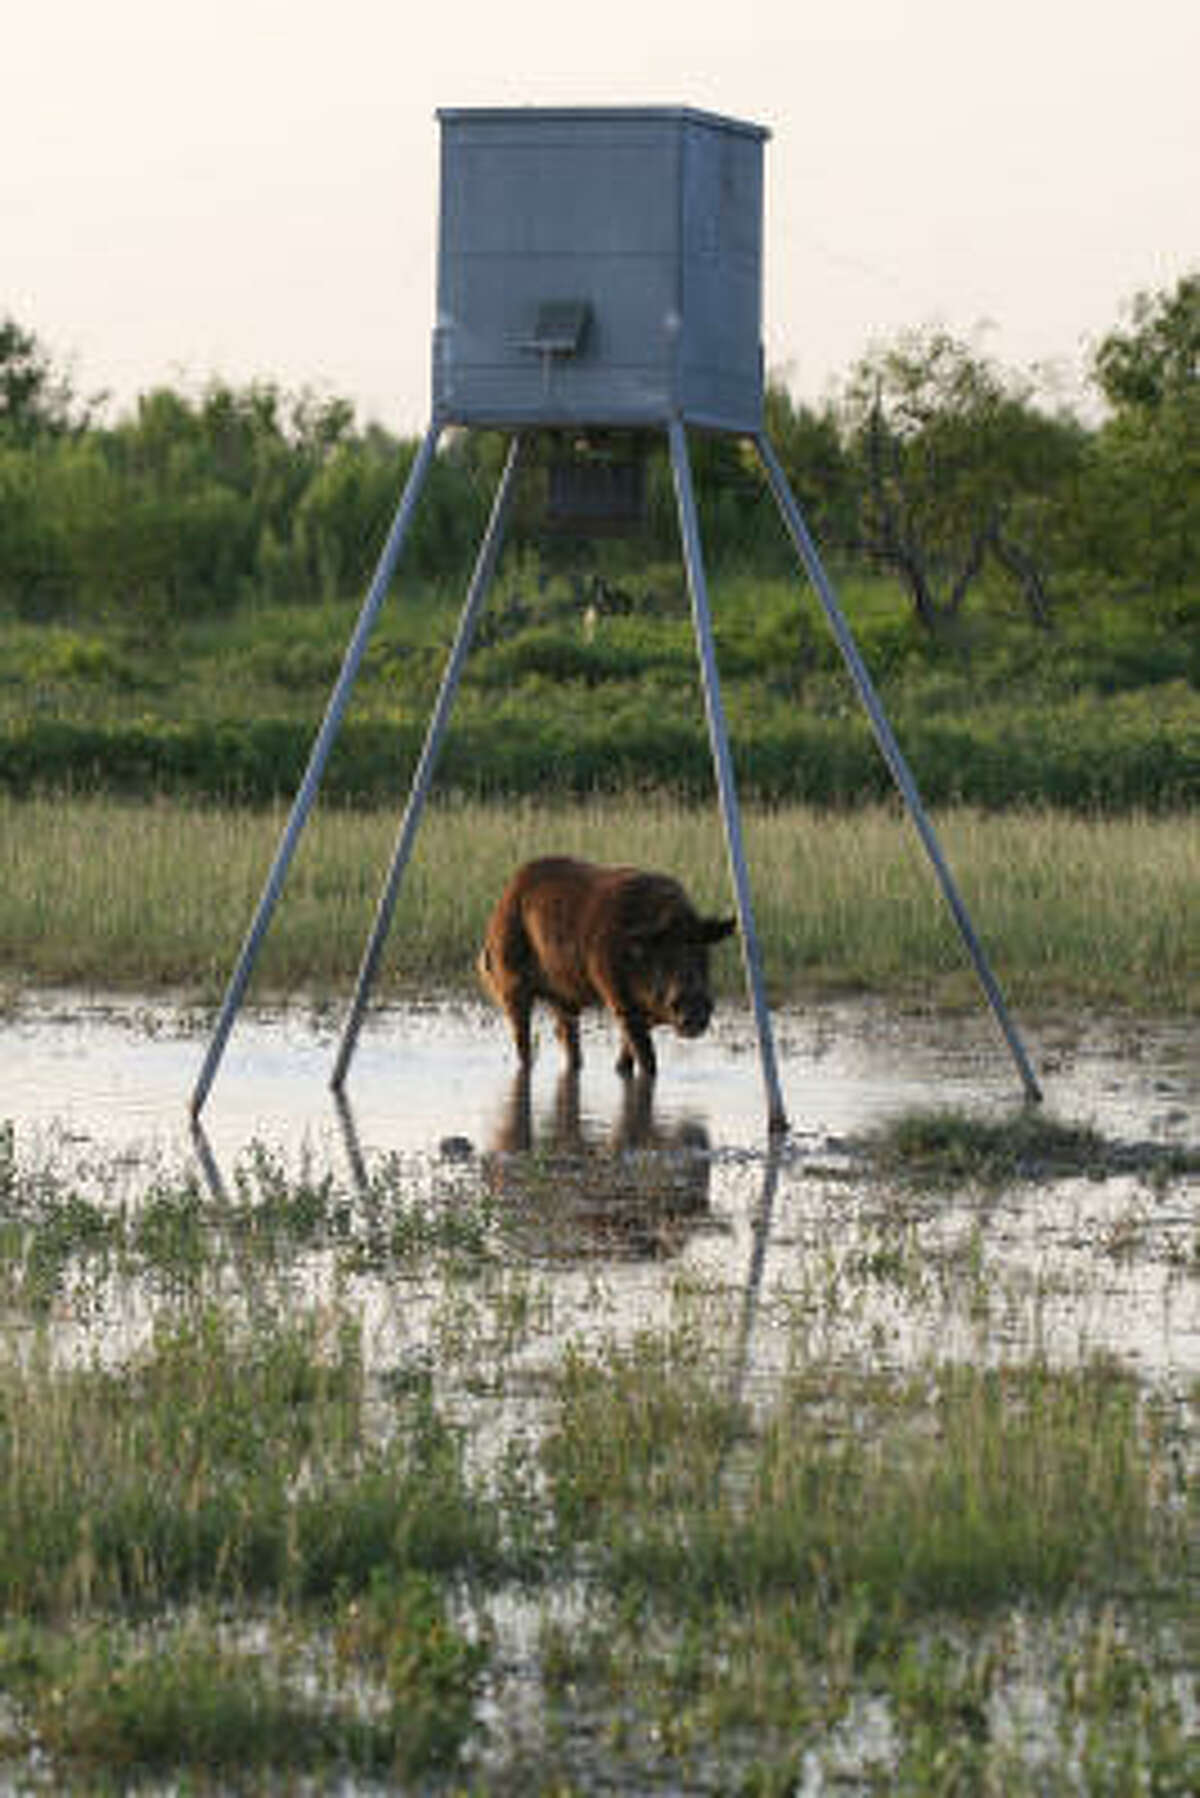 Feral hogs can dominate use of wildlife feeders, preventing deer and other wildlife from accessing the supplemental food. A recent Texas study indicates inexpensive, low wire-mesh fencing around the feeder can greatly reduce hog access without restricting deer visits.